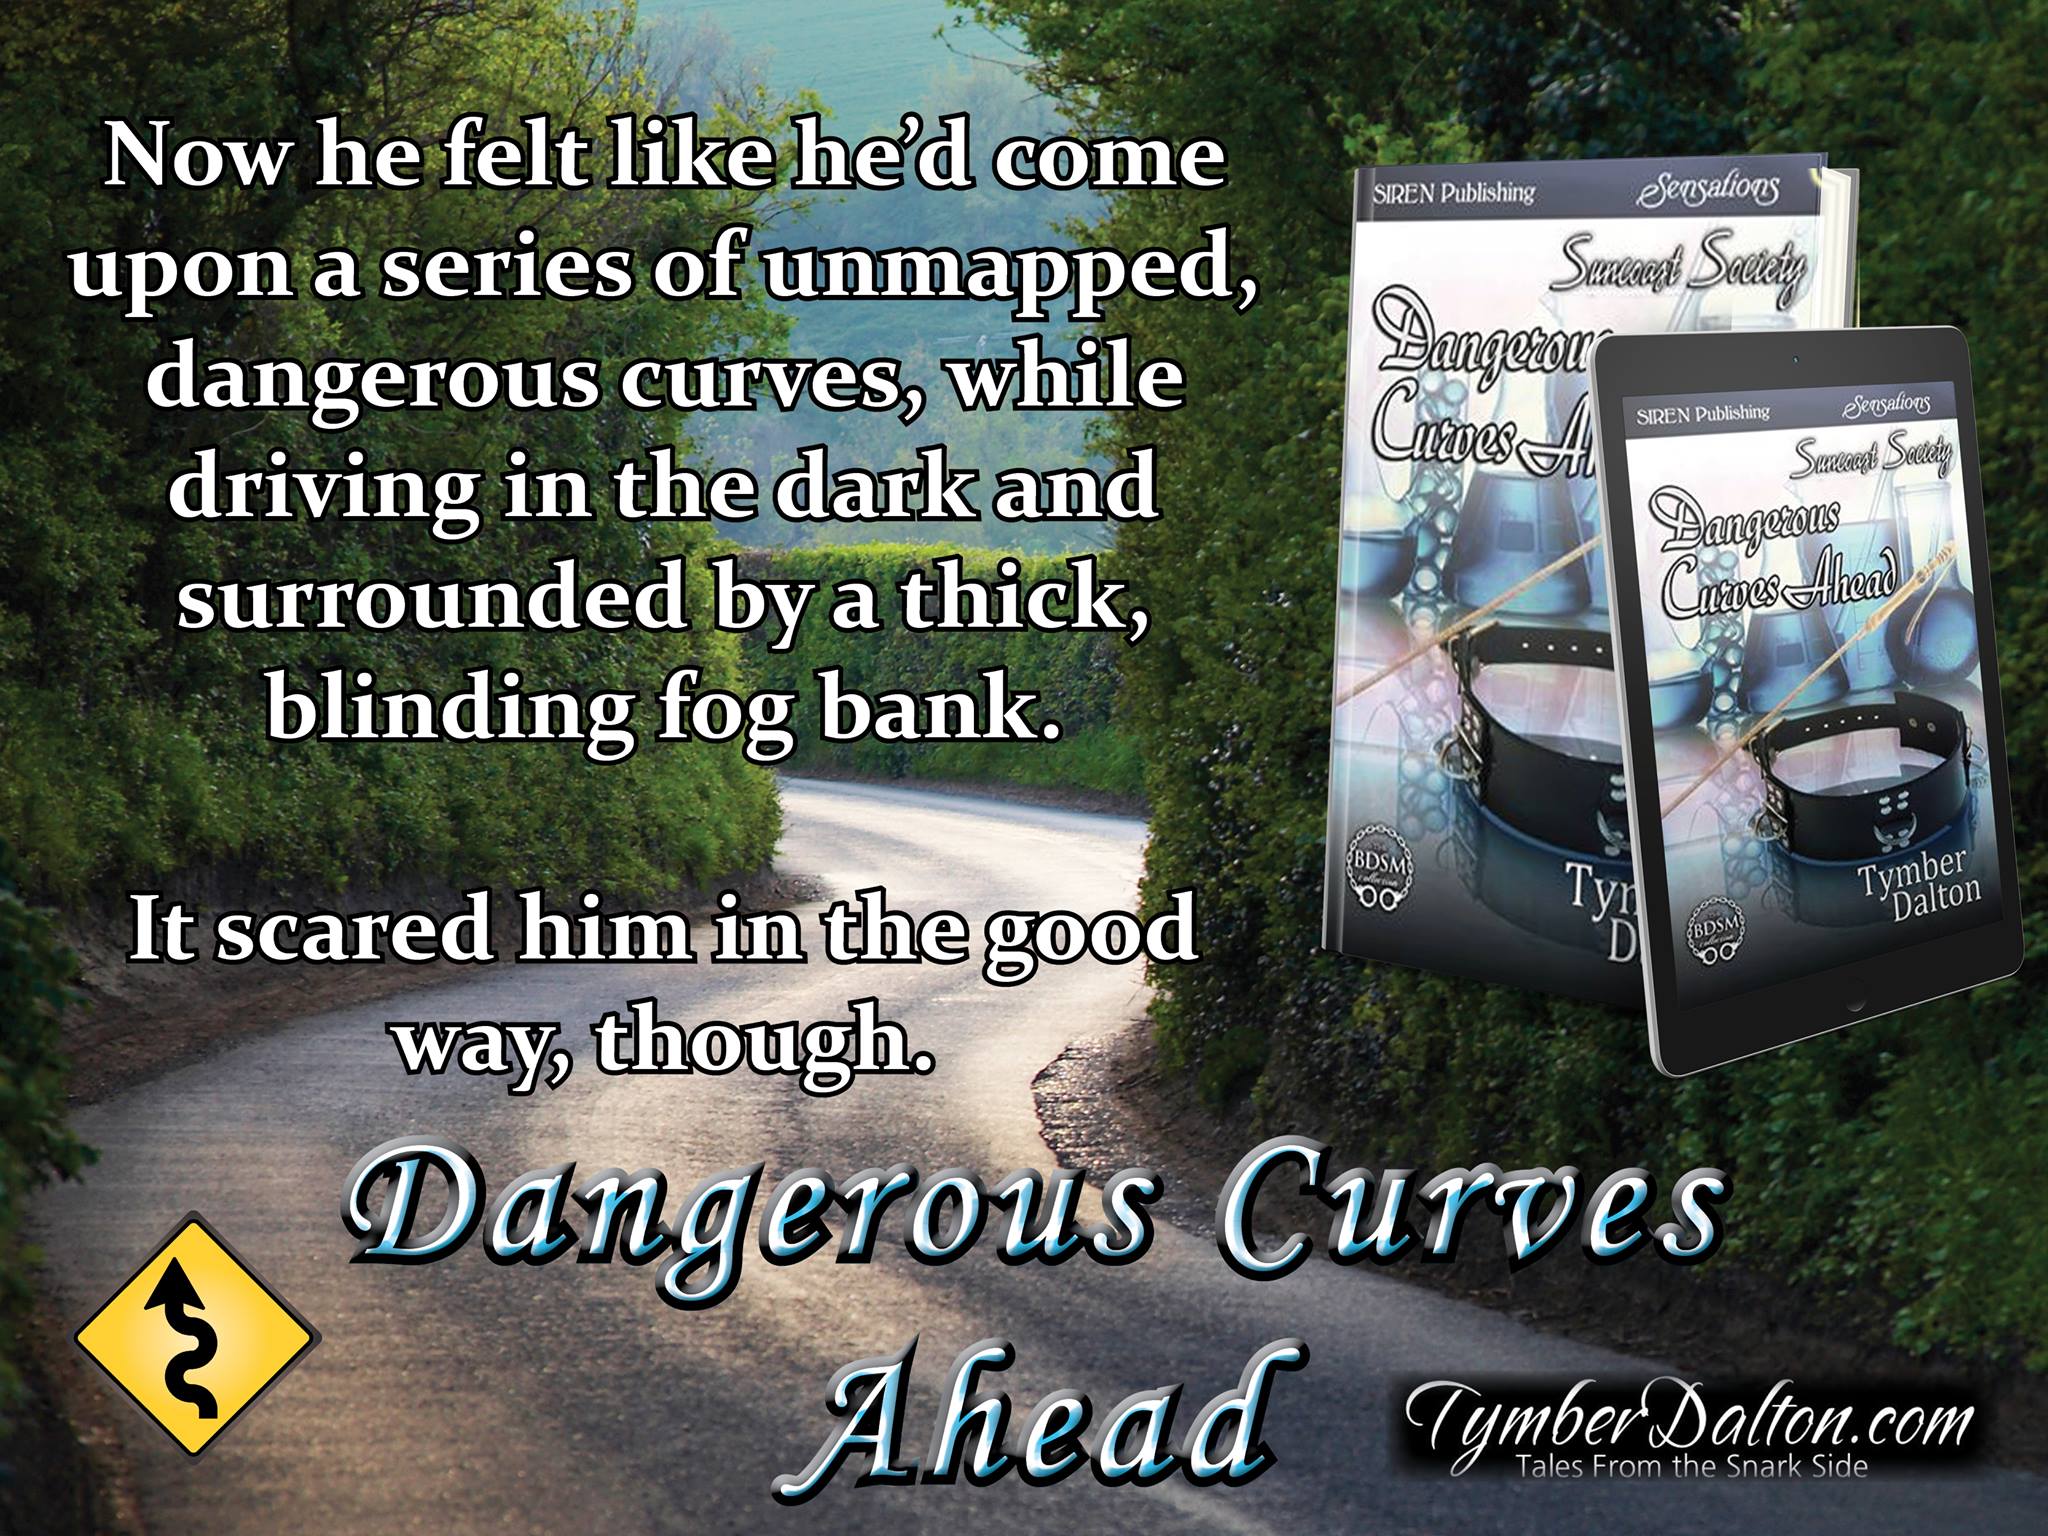 Release Day! Dangerous Curves Ahead (Suncoast Society)